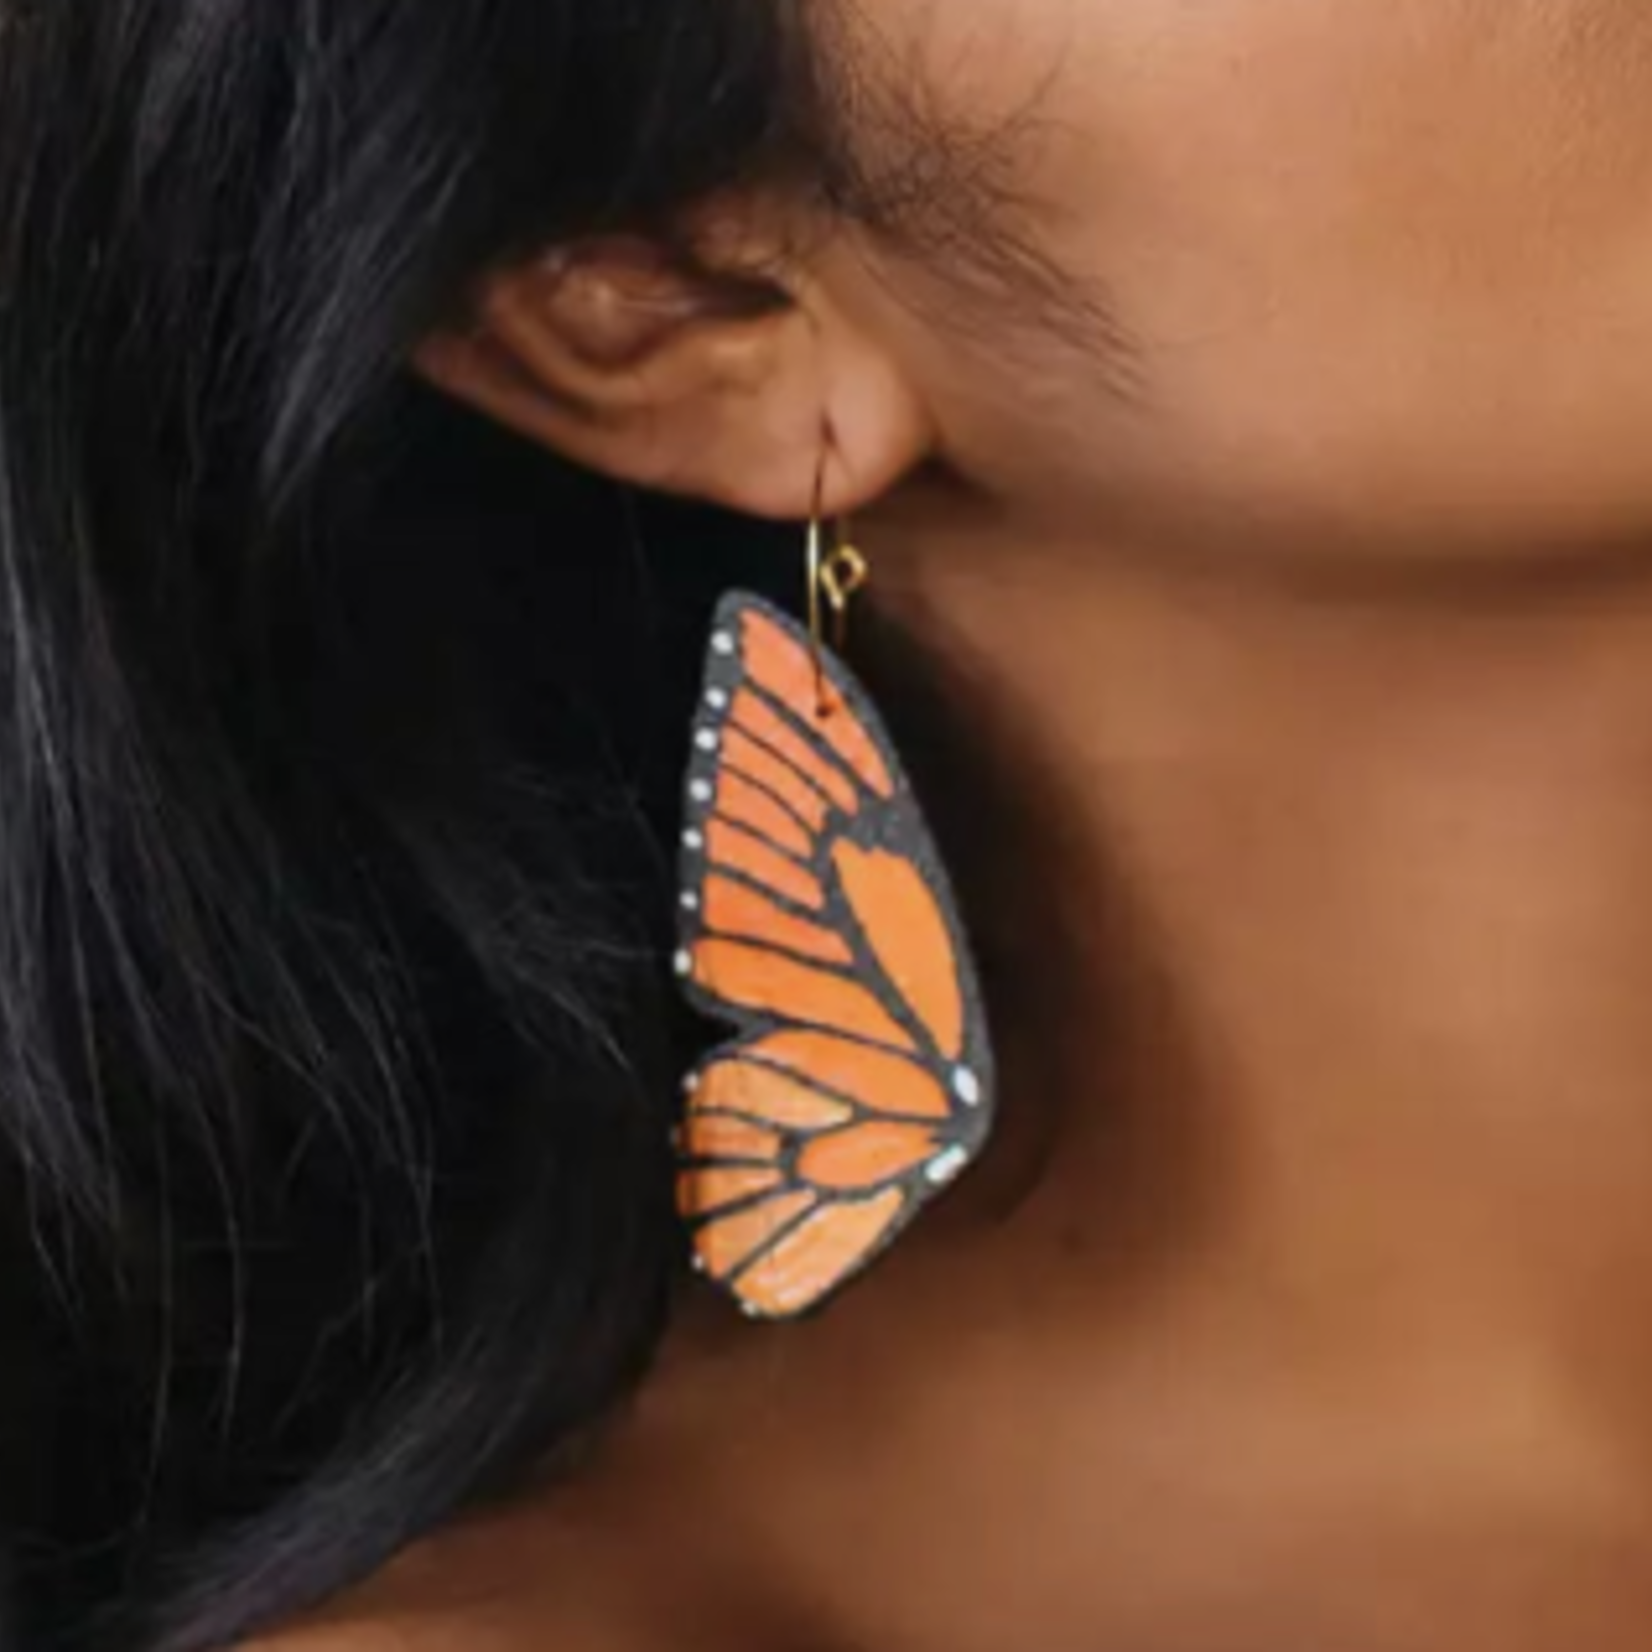 Le Chic Miami c/o Faire Monarch Butterfly Wing Earrings by Le Chic Miami